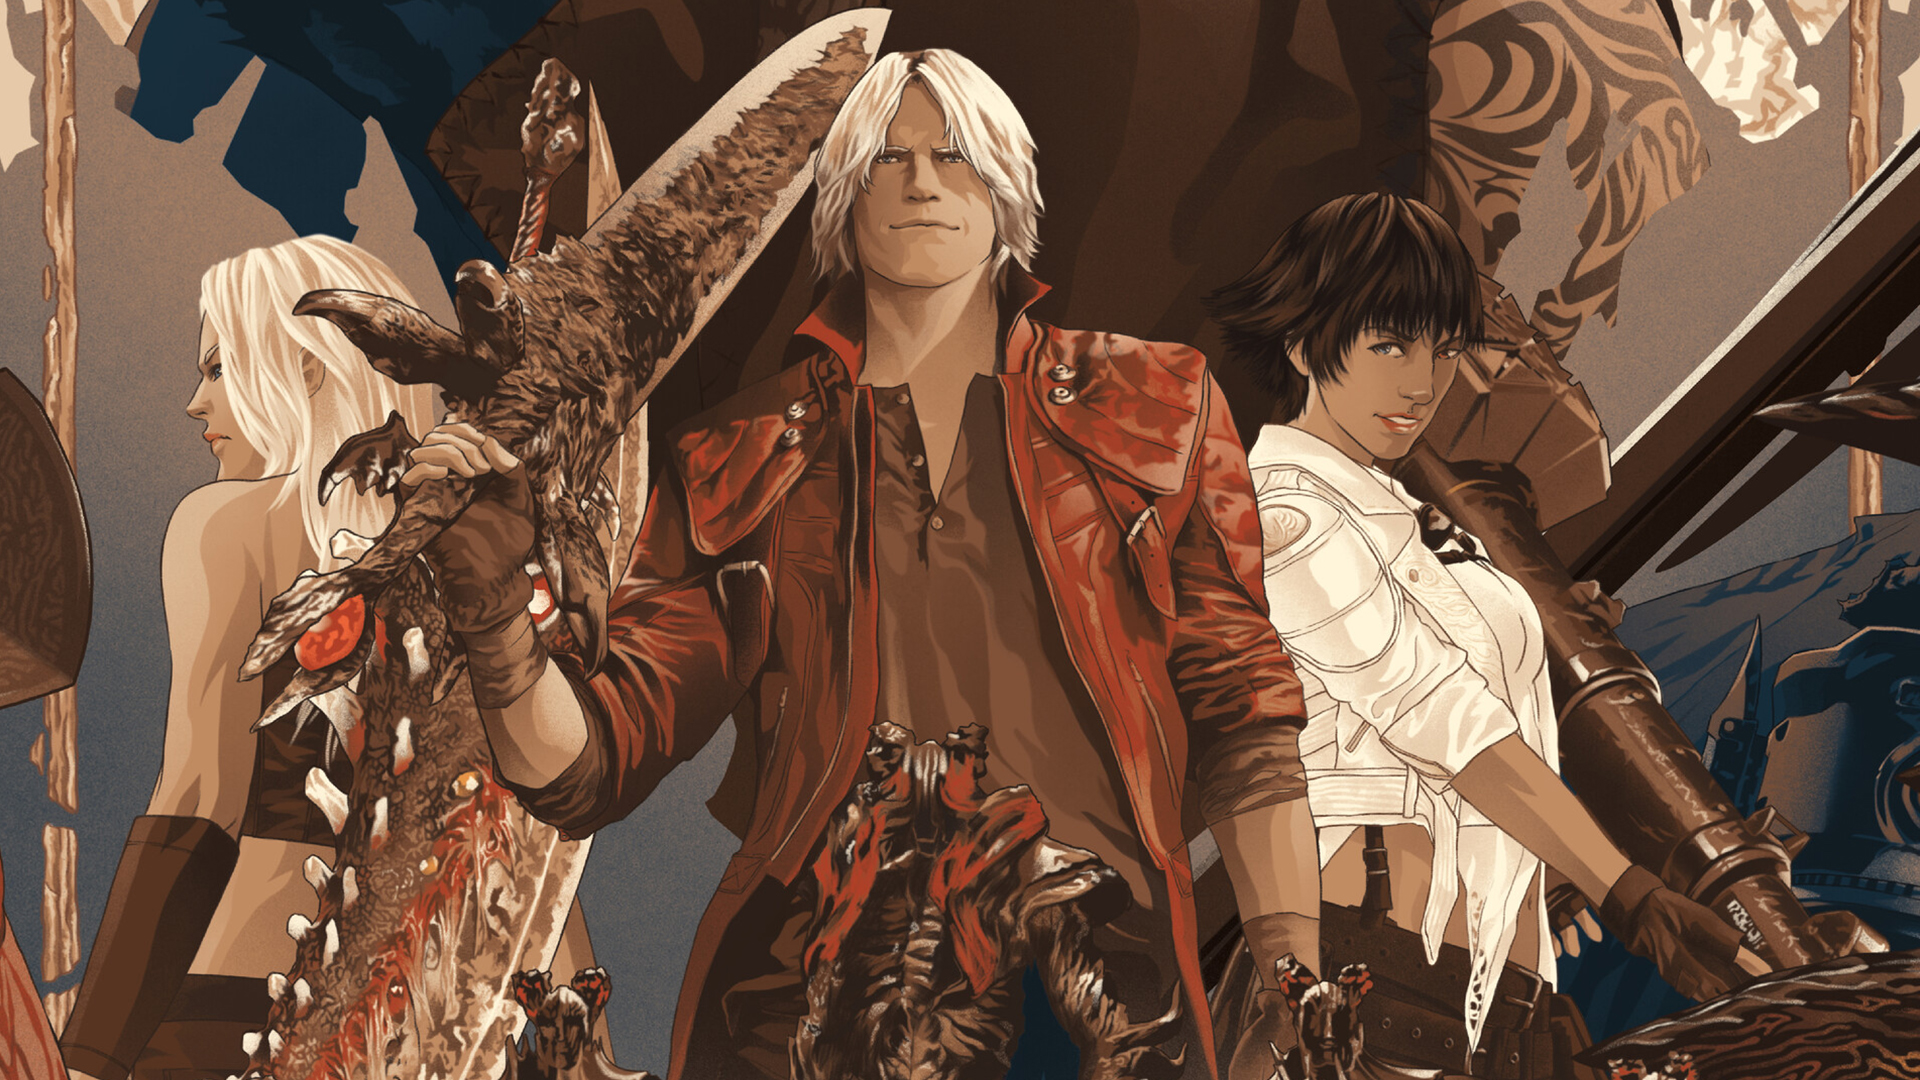 Dante Devil May Cry Devil May Cry 5 Lady Devil May Cry Trish Devil May Cry 1920x1080